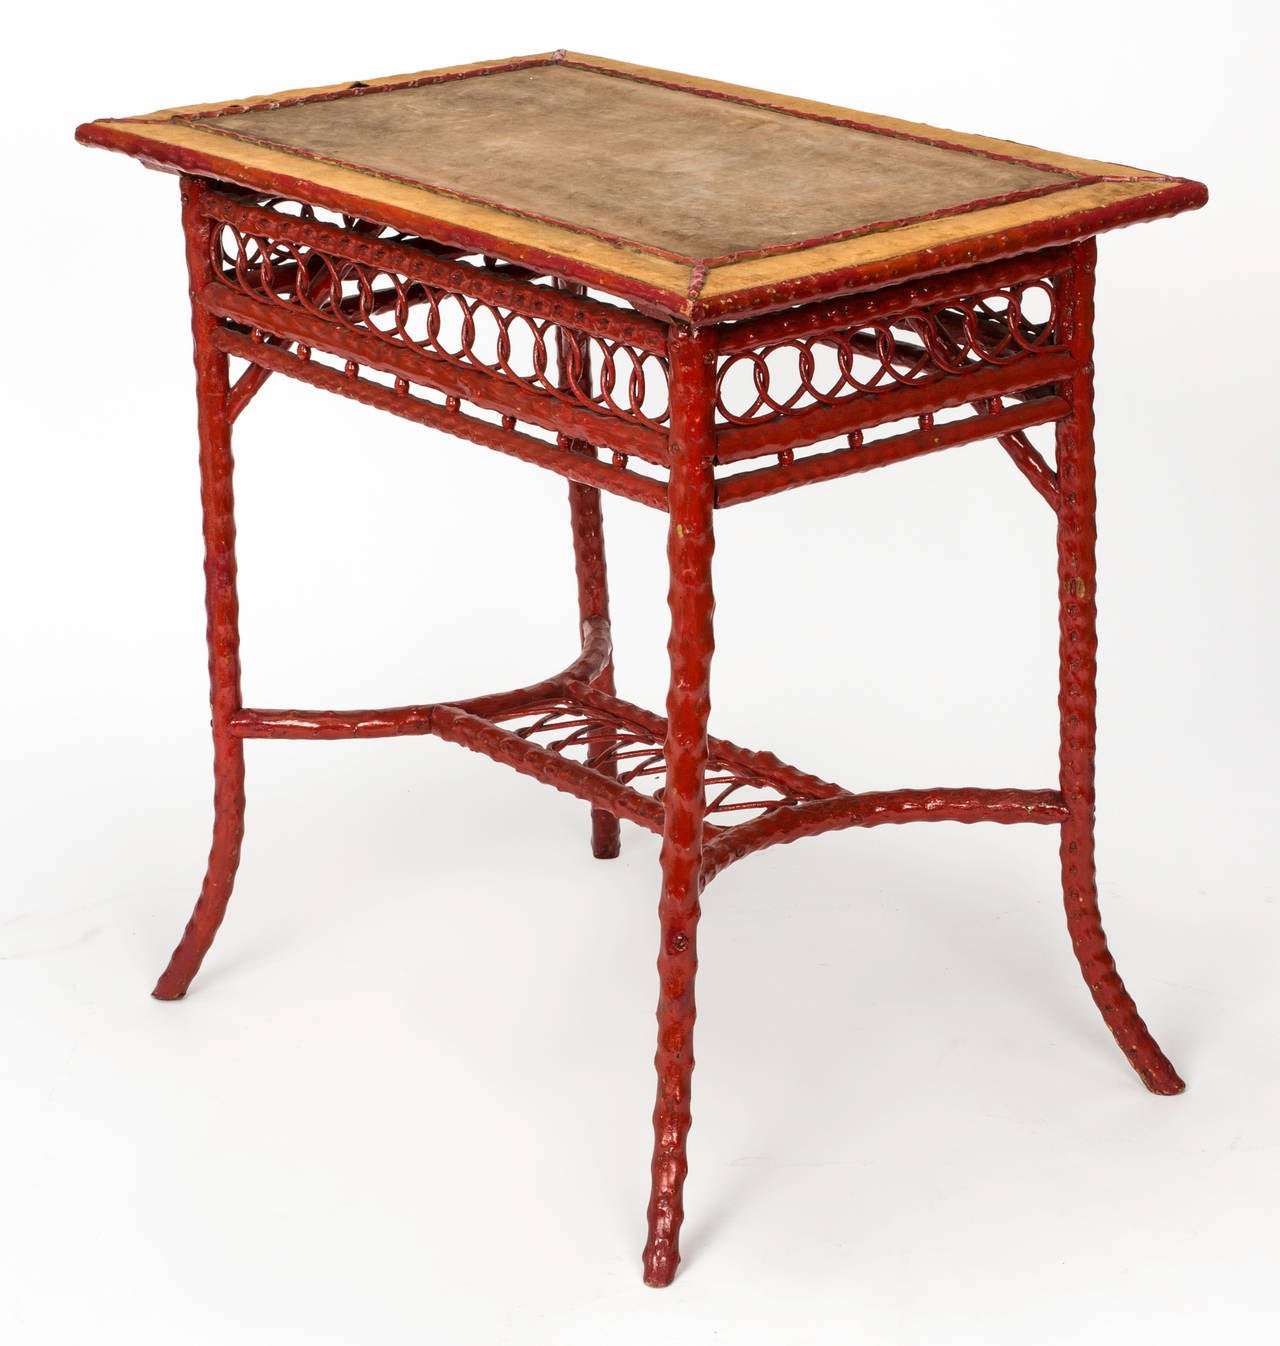 From mid-1800s, English bamboo table painted in red lacquer to look like the Chinese red Cinnabar. 
Original velvet covering on top. Lovely accent table. Useful as a desk or bedside table. Matching chairs and other pieces can be seen on this site